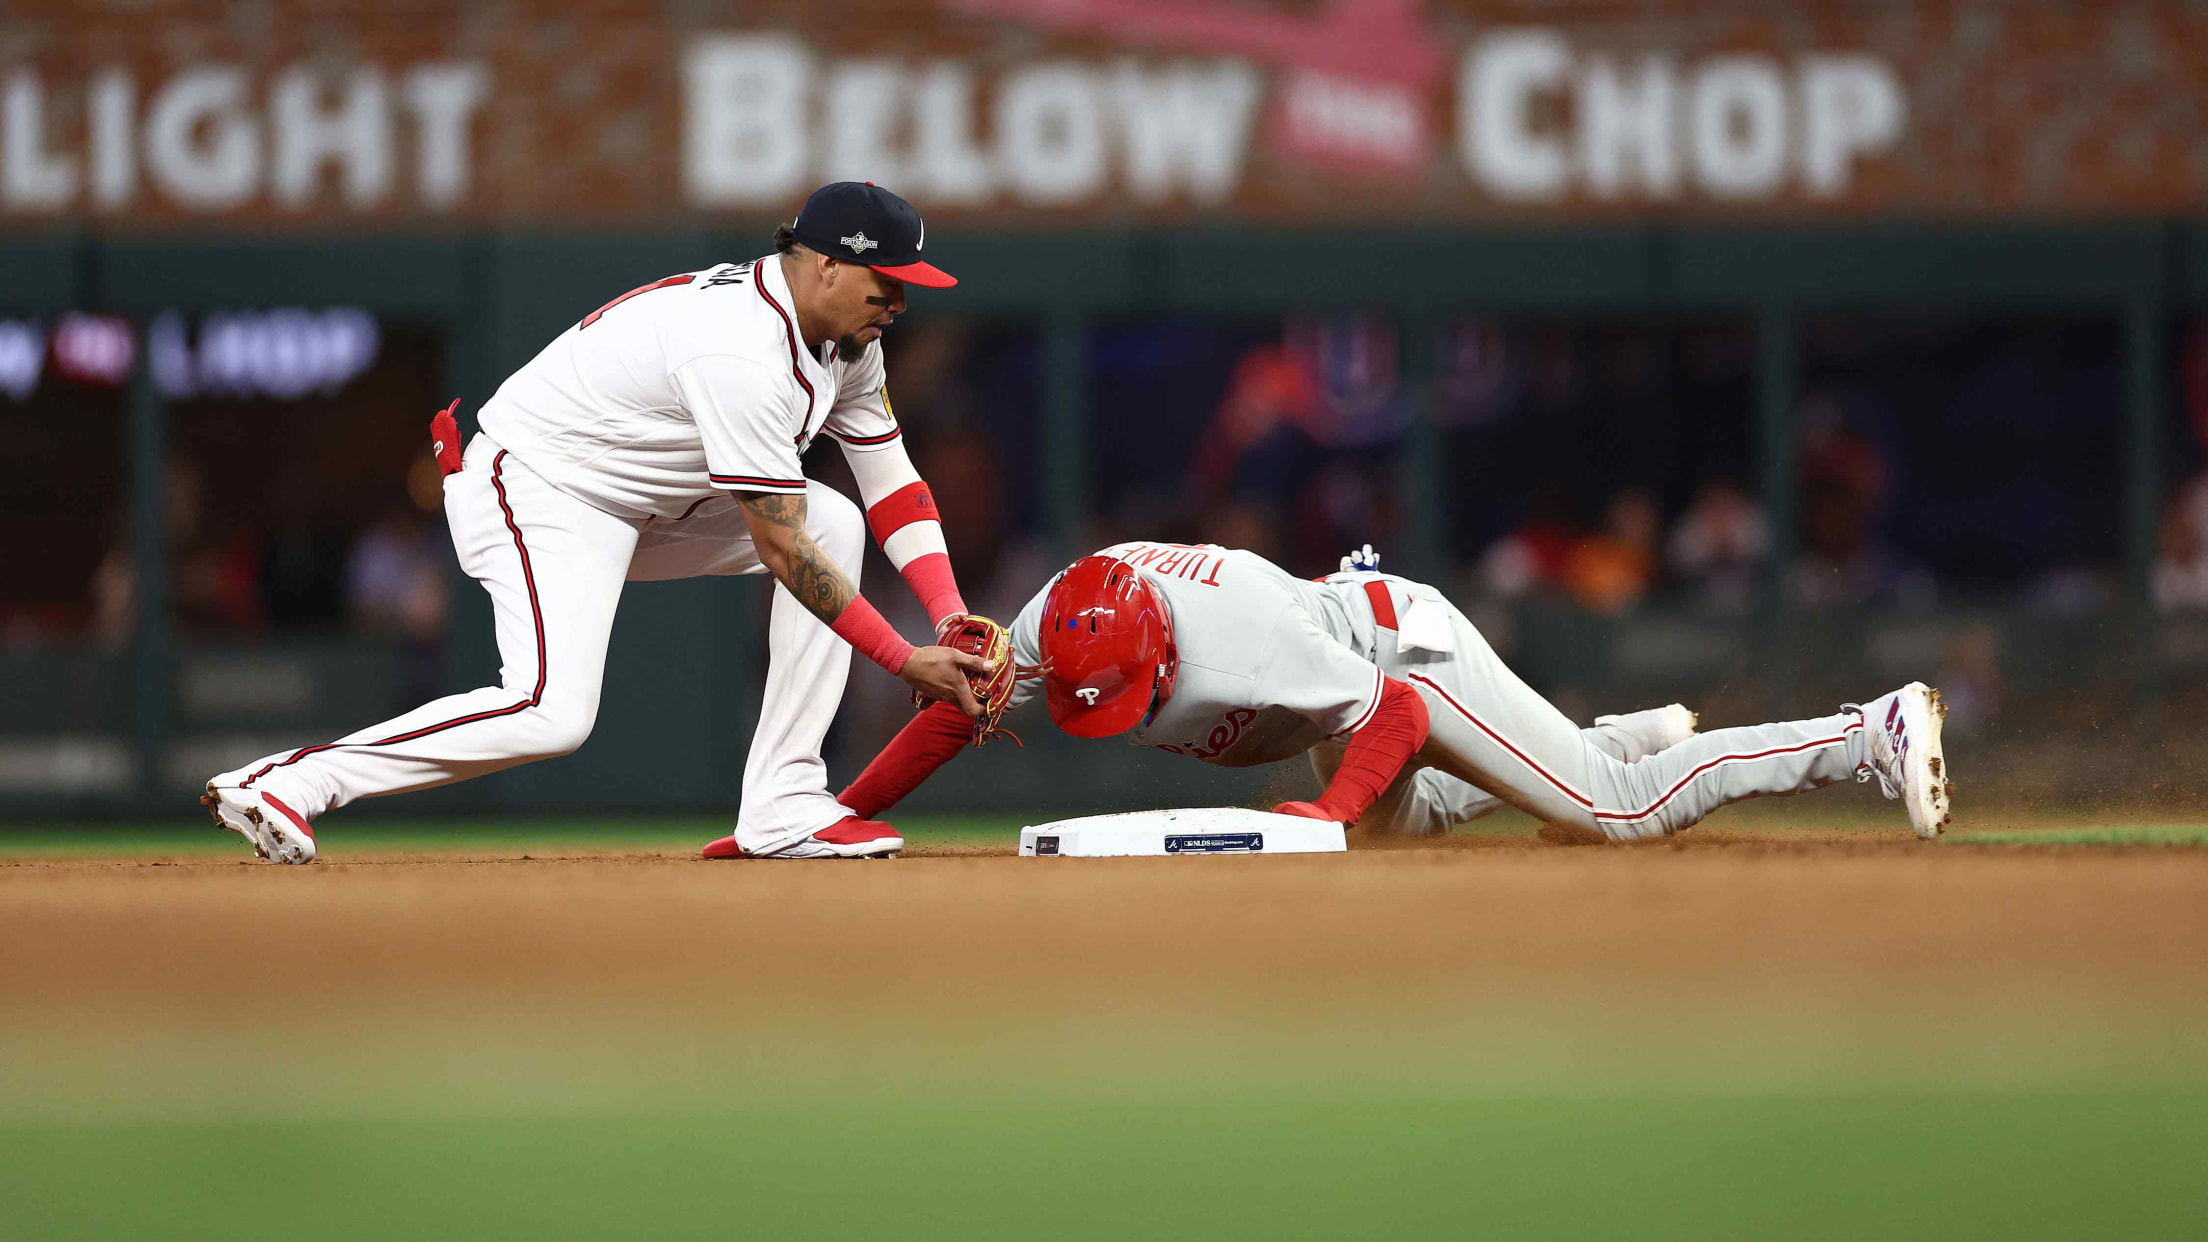 Orlando Arcia tags Trea Turner late after he steals second base